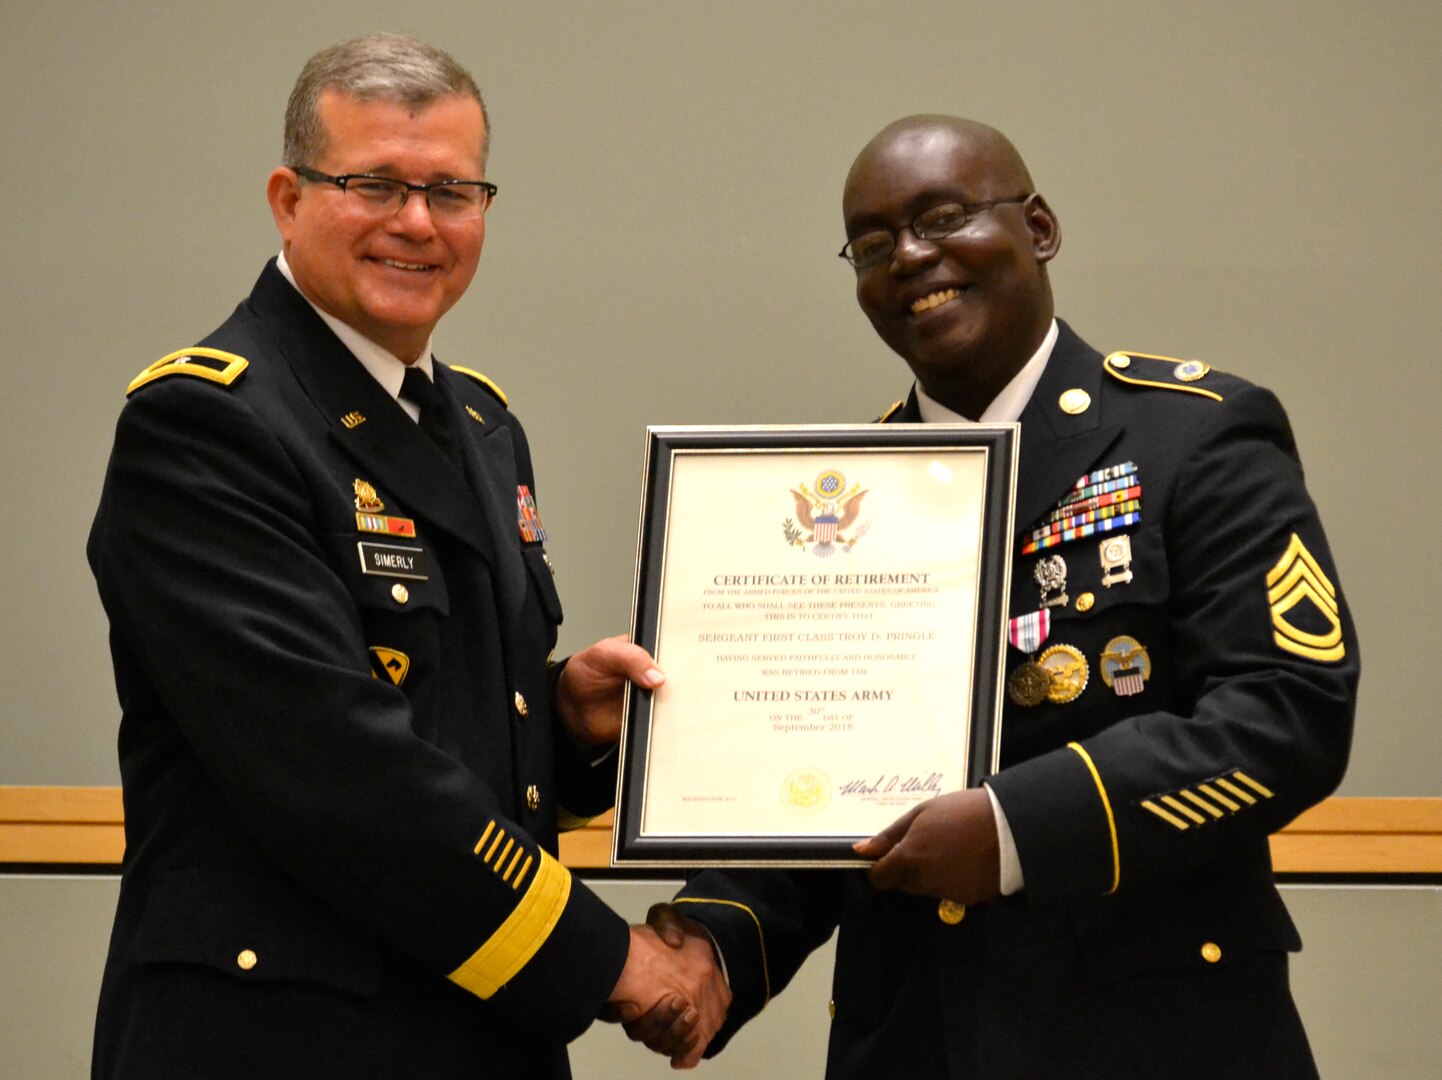 DLA Troop Support Commander Army Brig. Gen. Mark Simerly (left) poses with Army Sgt. 1st Class Troy Pringle after presenting his certificate of retirement June 1 in Philadelphia. Pringle was joined by friends and family who honored his retirement after 23 years of service in the Army.